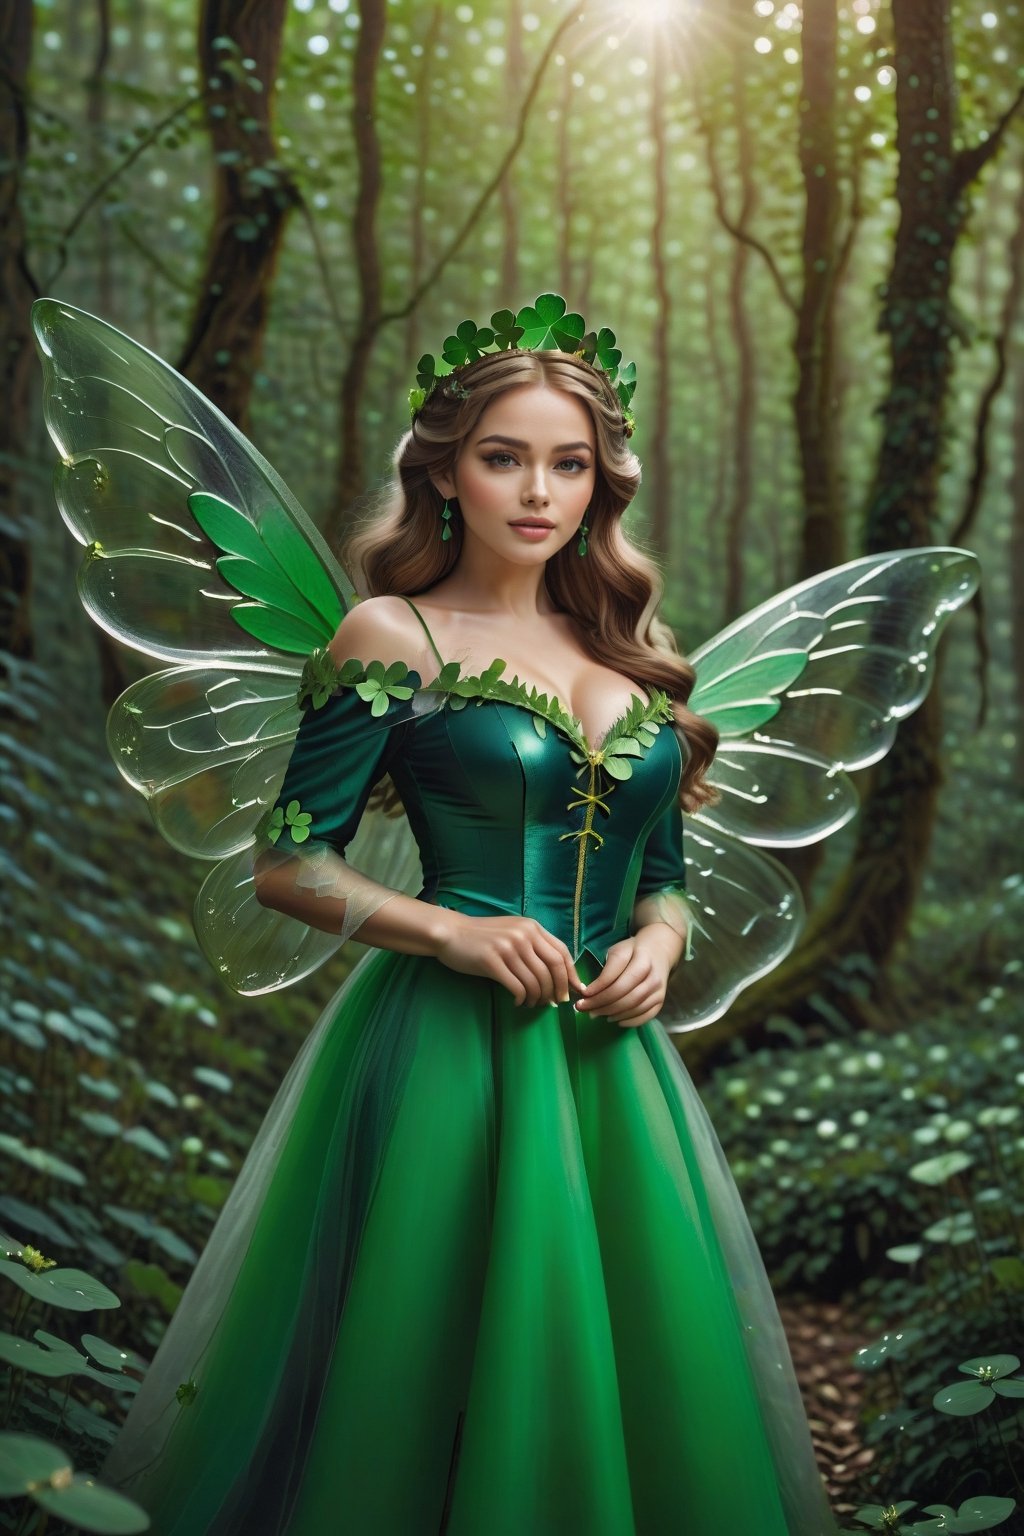 The girl noble wizard of Oz, big breasts, shining hair, dressed in clothes decorated with four-leaf clover and wearing a crown made of four-leaf clover, has beautiful green elf wings and flies and shuttles in the magical forest.